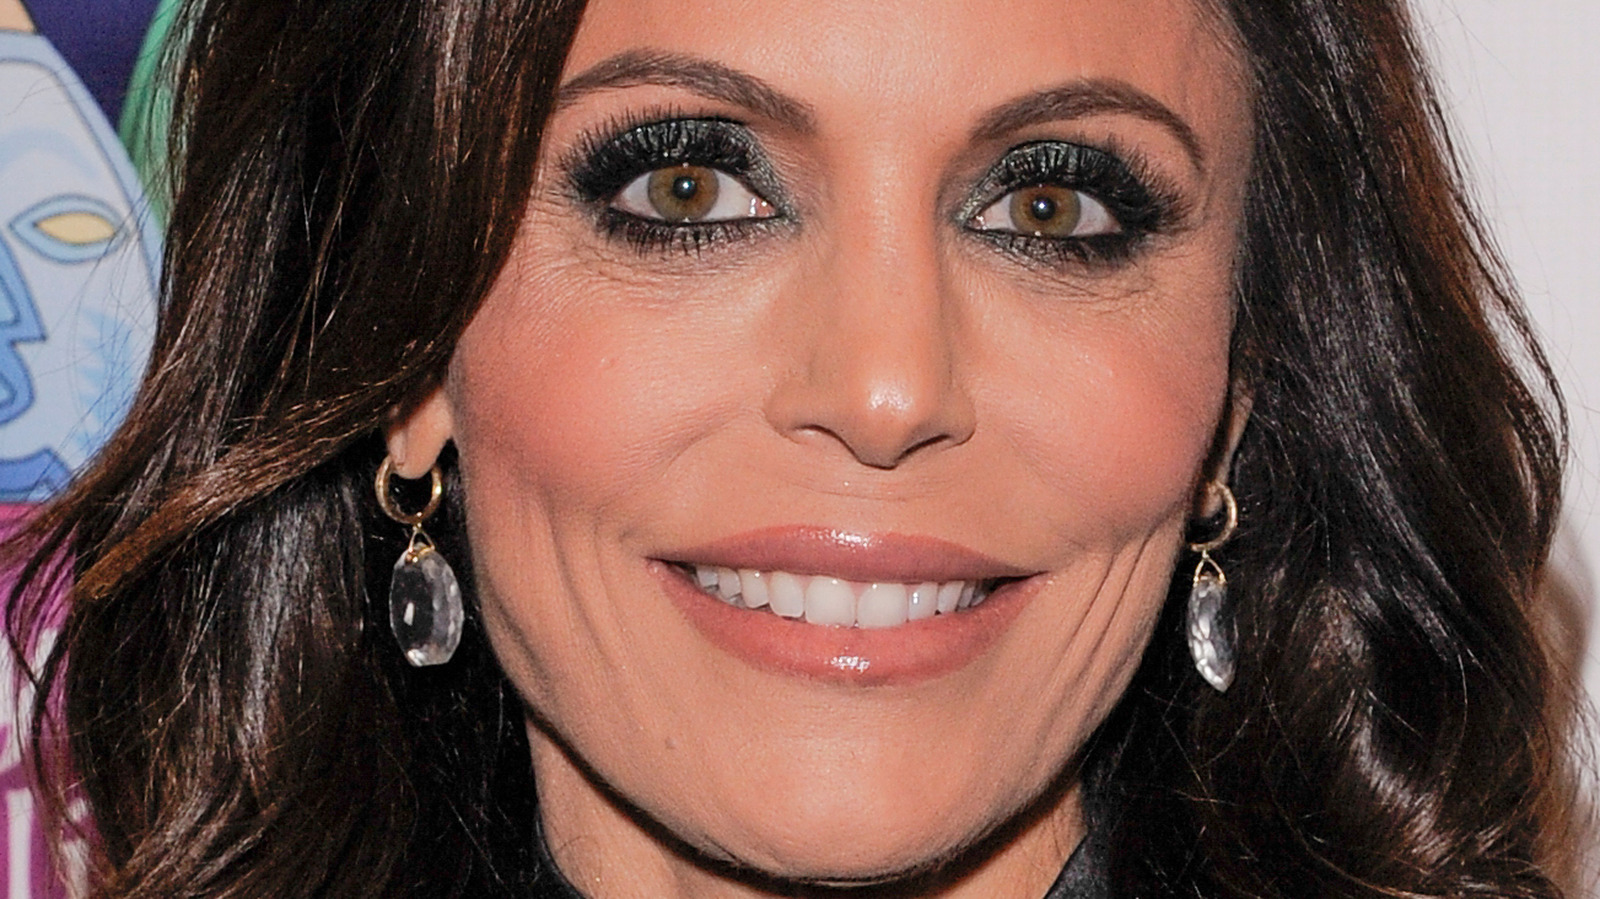 What Is Bethenny Frankel's Involvement With Skinnygirl Today?